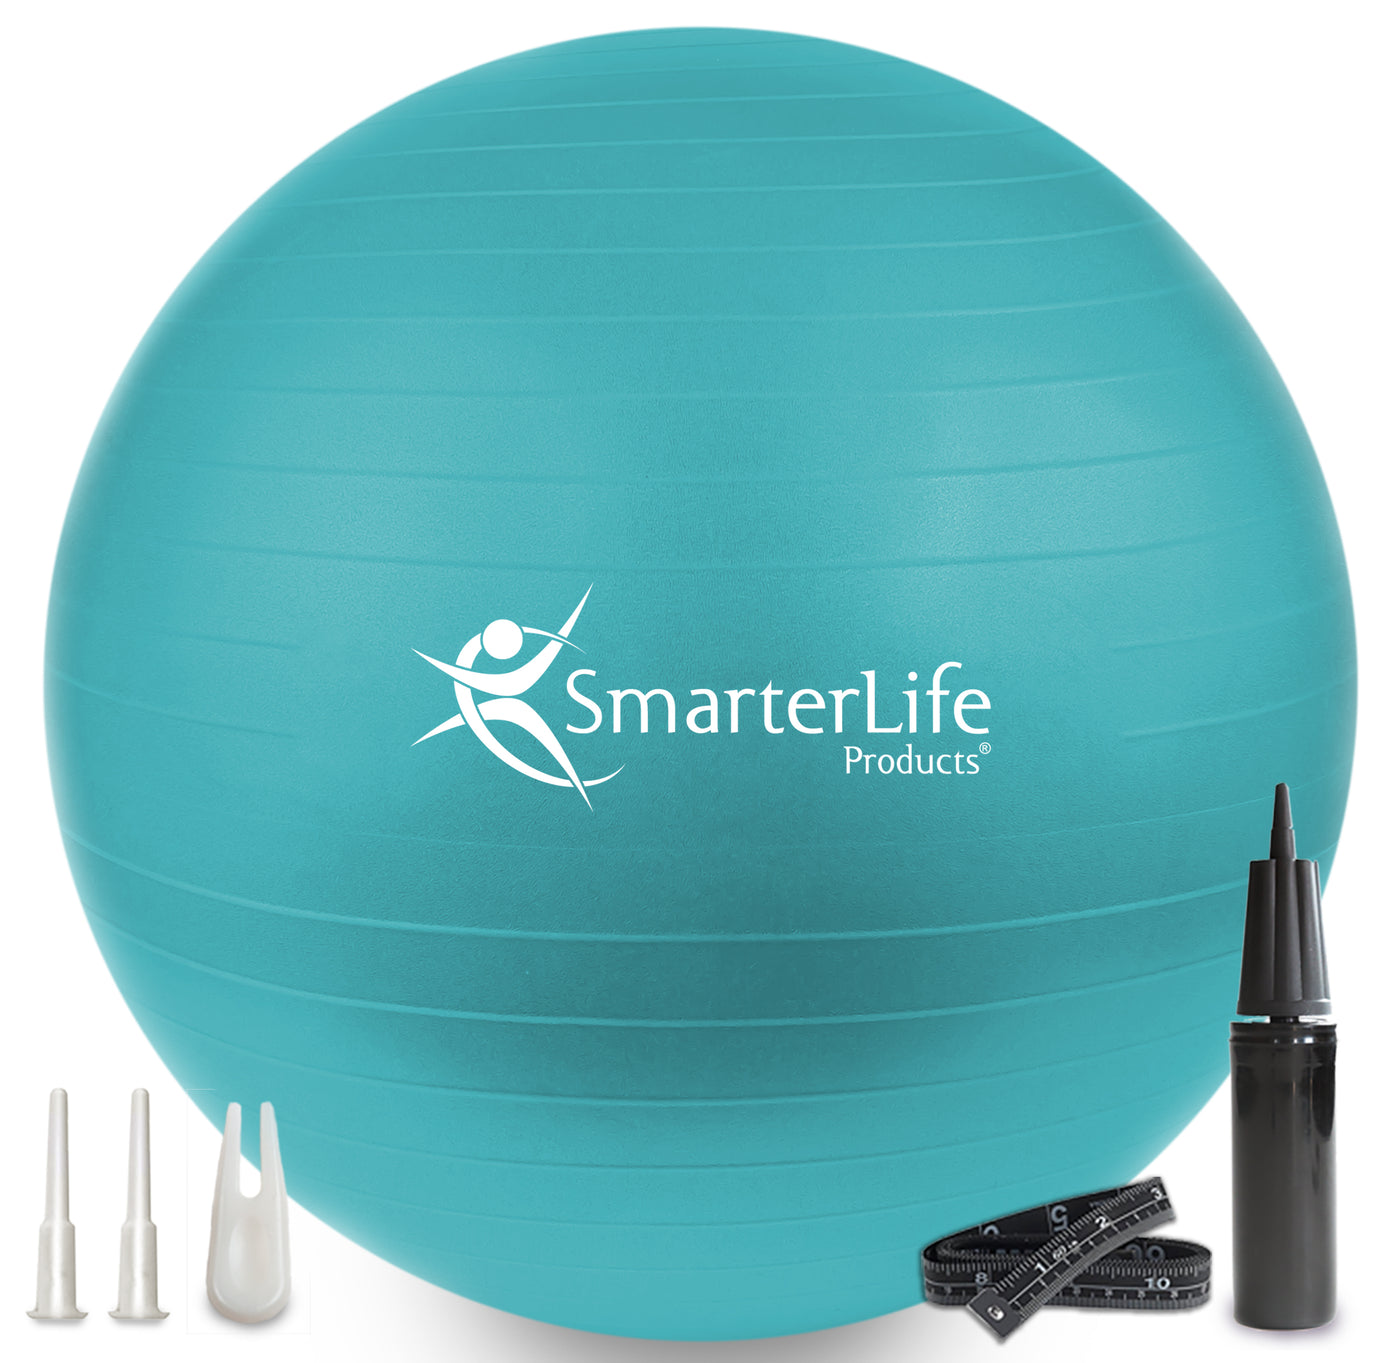 Exercise Ball Work Guides - Live Infinitely